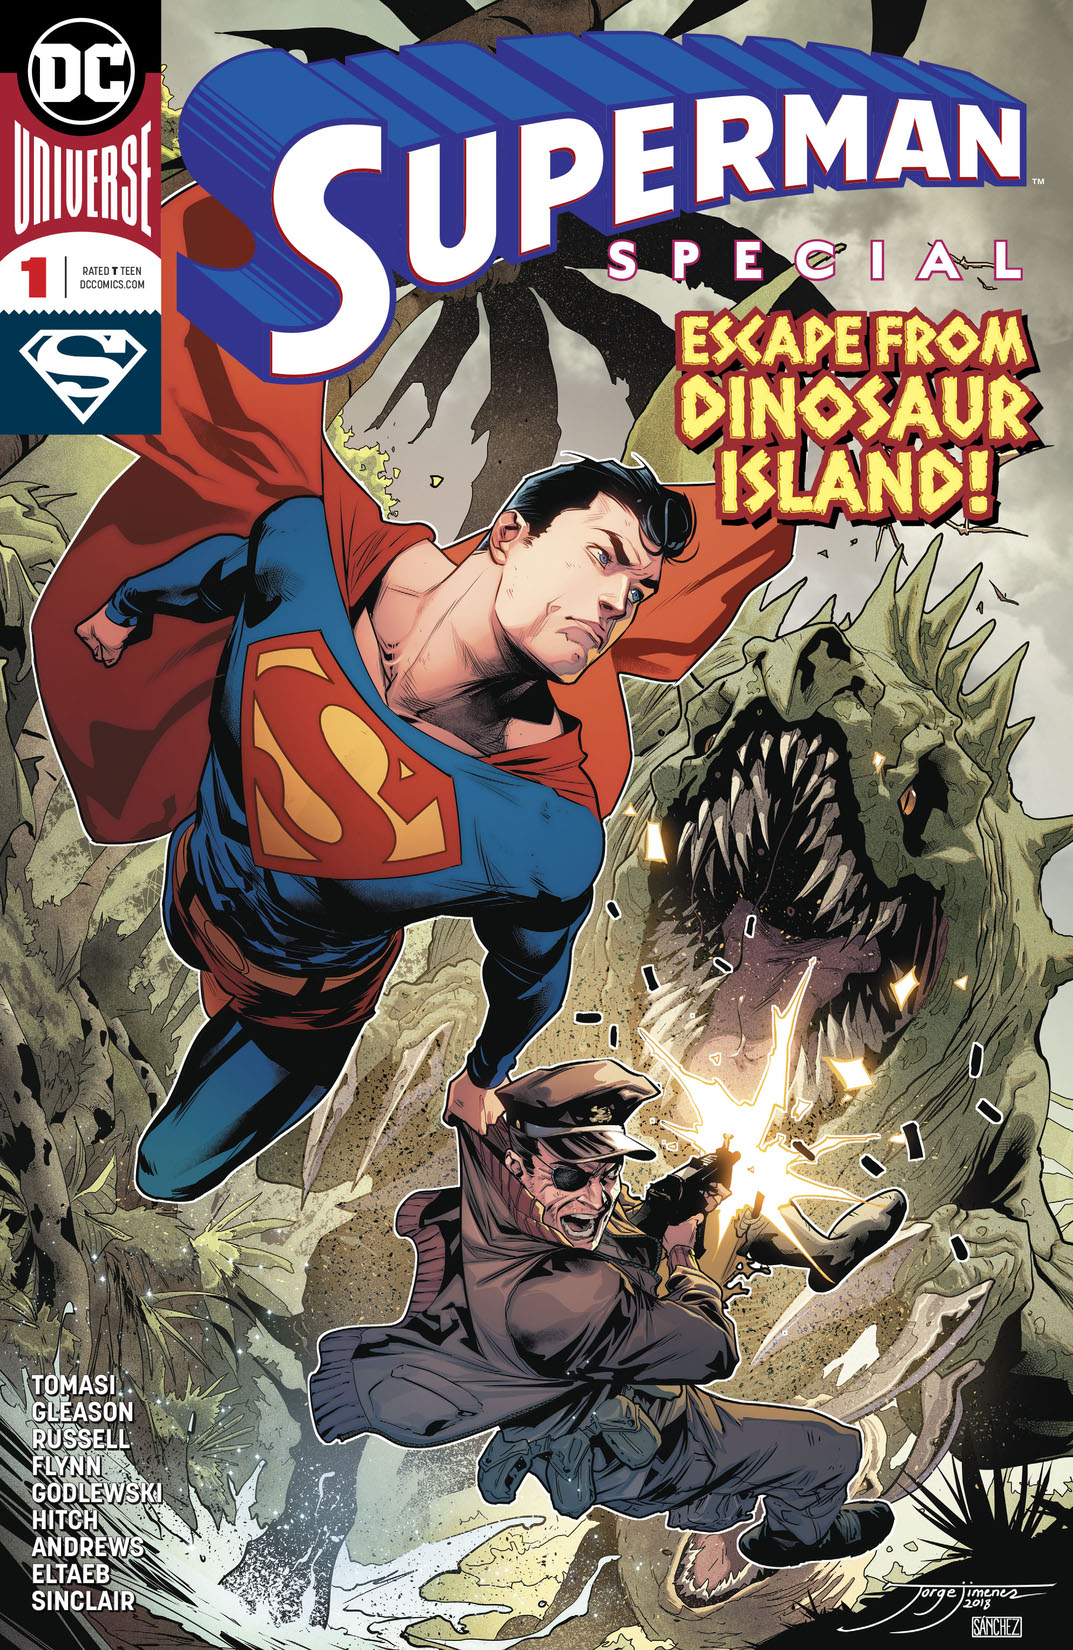 Superman Special #1 (2018-) #1 preview images